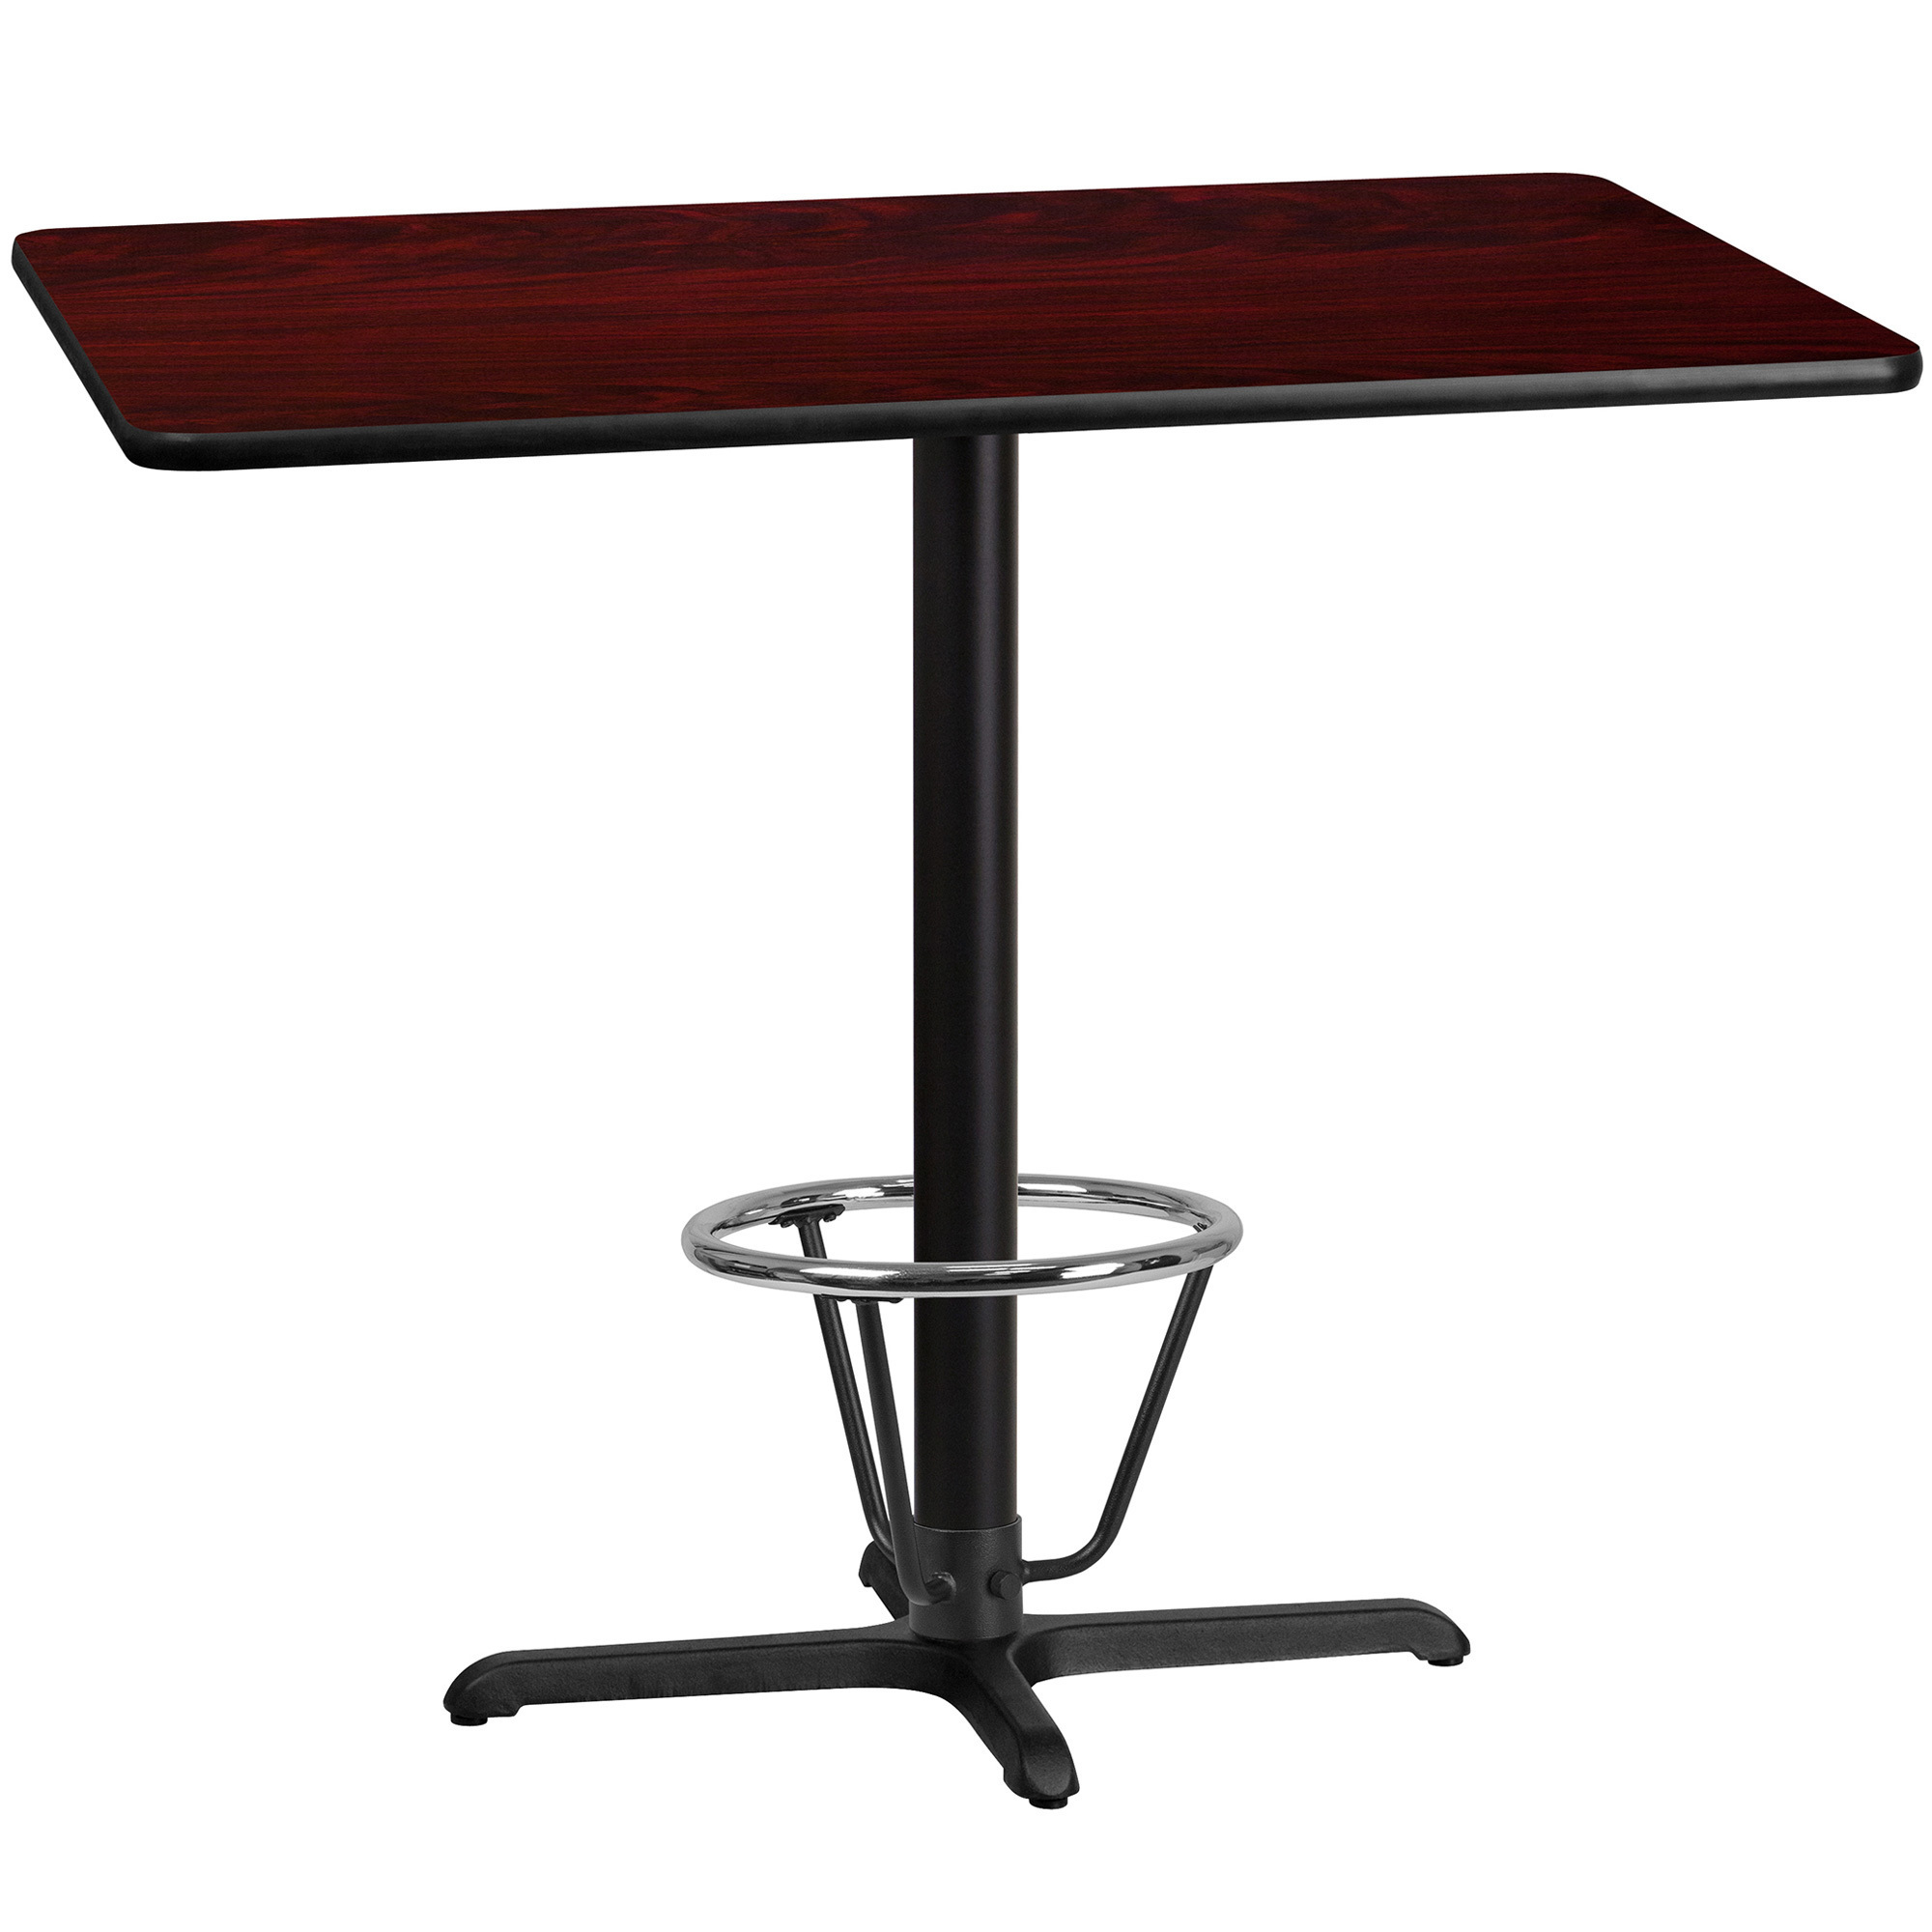 Flash Furniture 48Inch L x 30Inch W Bar Height Metal Table with X-Base â Mahogany/Black Reversible Laminate Top, Model XUMA3048T230B3F